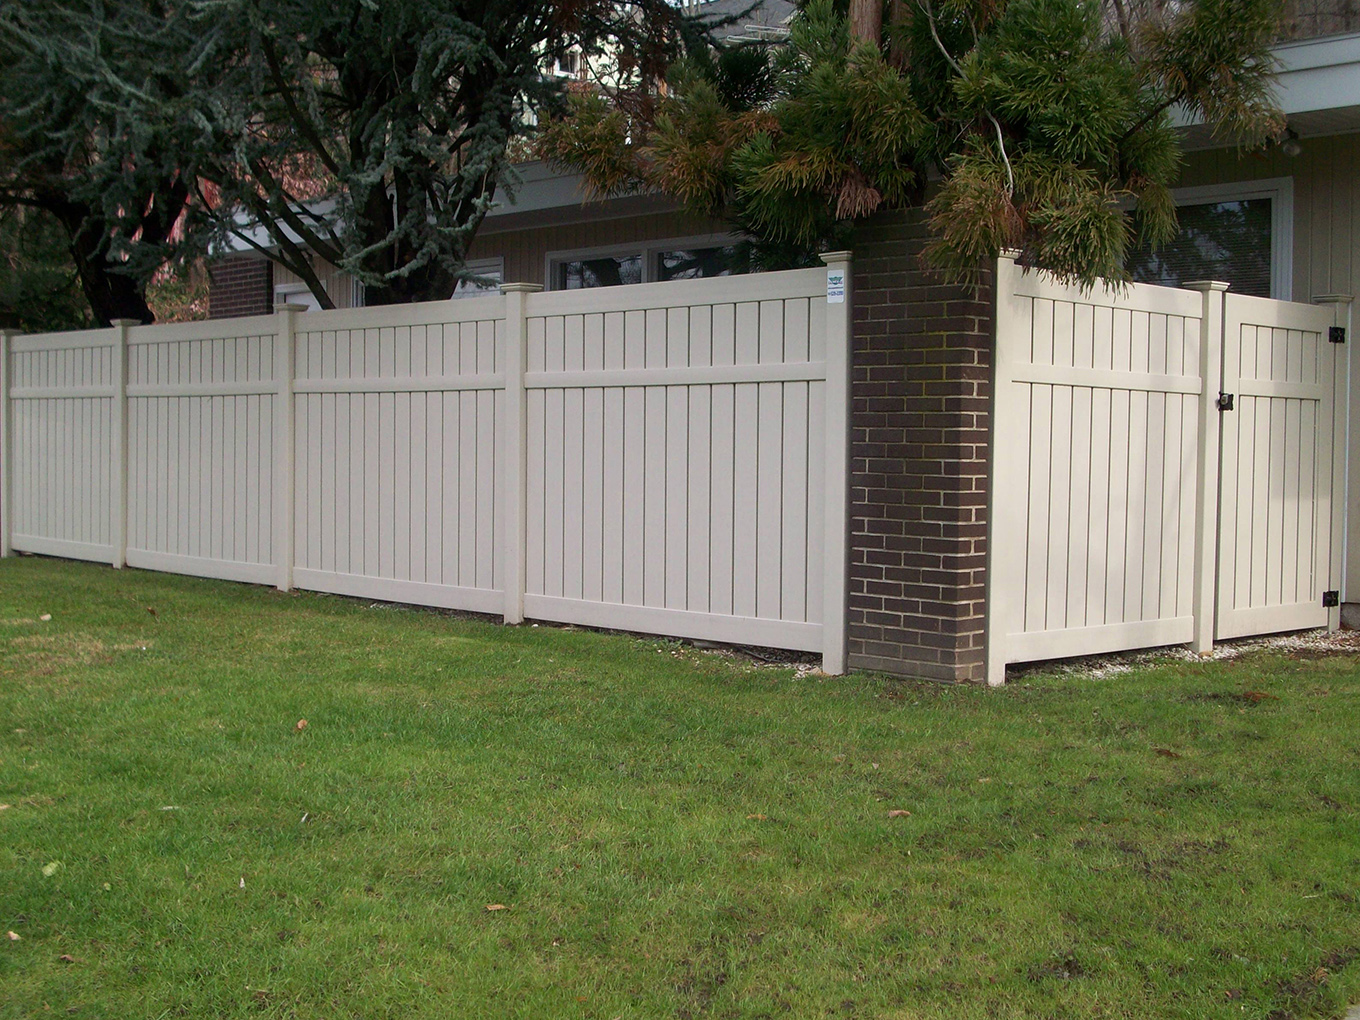 Photo of a vinyl privacy fence in Mahopac, NY